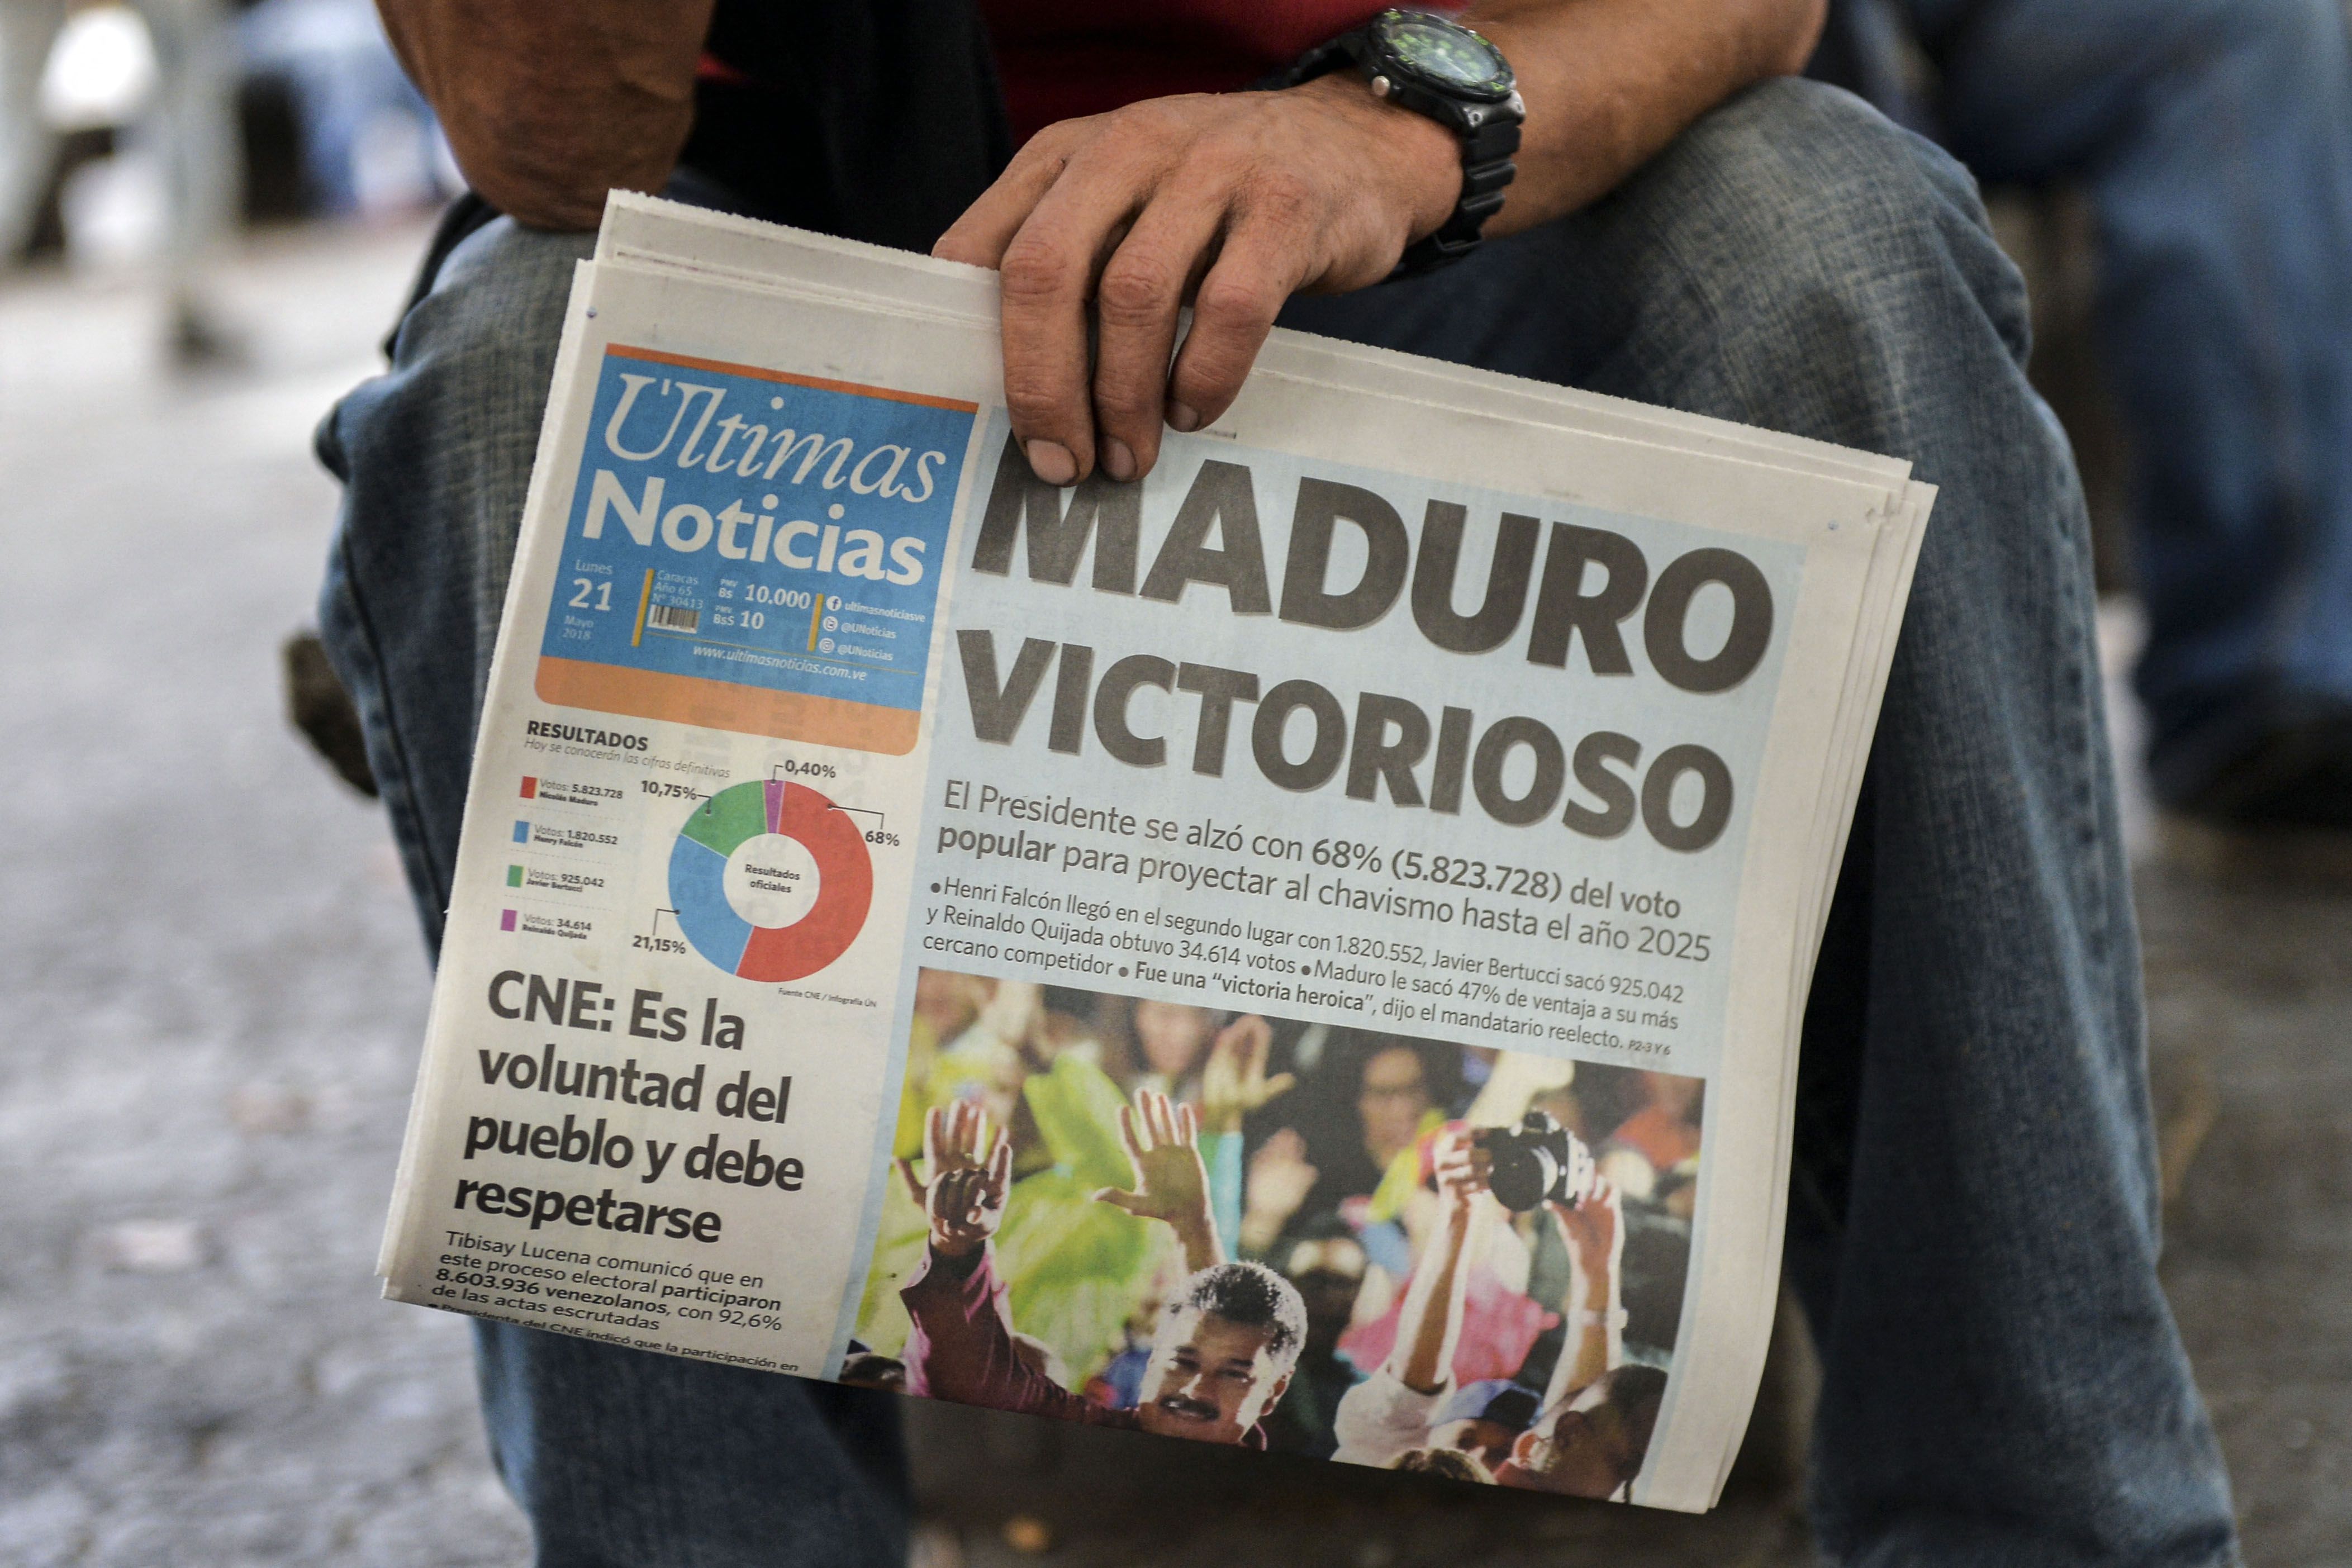 A man holds a newspaper that refers to the victory of re-elected president Nicolás Maduro in the Venezuelan presidential elections in Caracas, on May 21, 2018. (Photo by Luis ROBAYO/AFP).